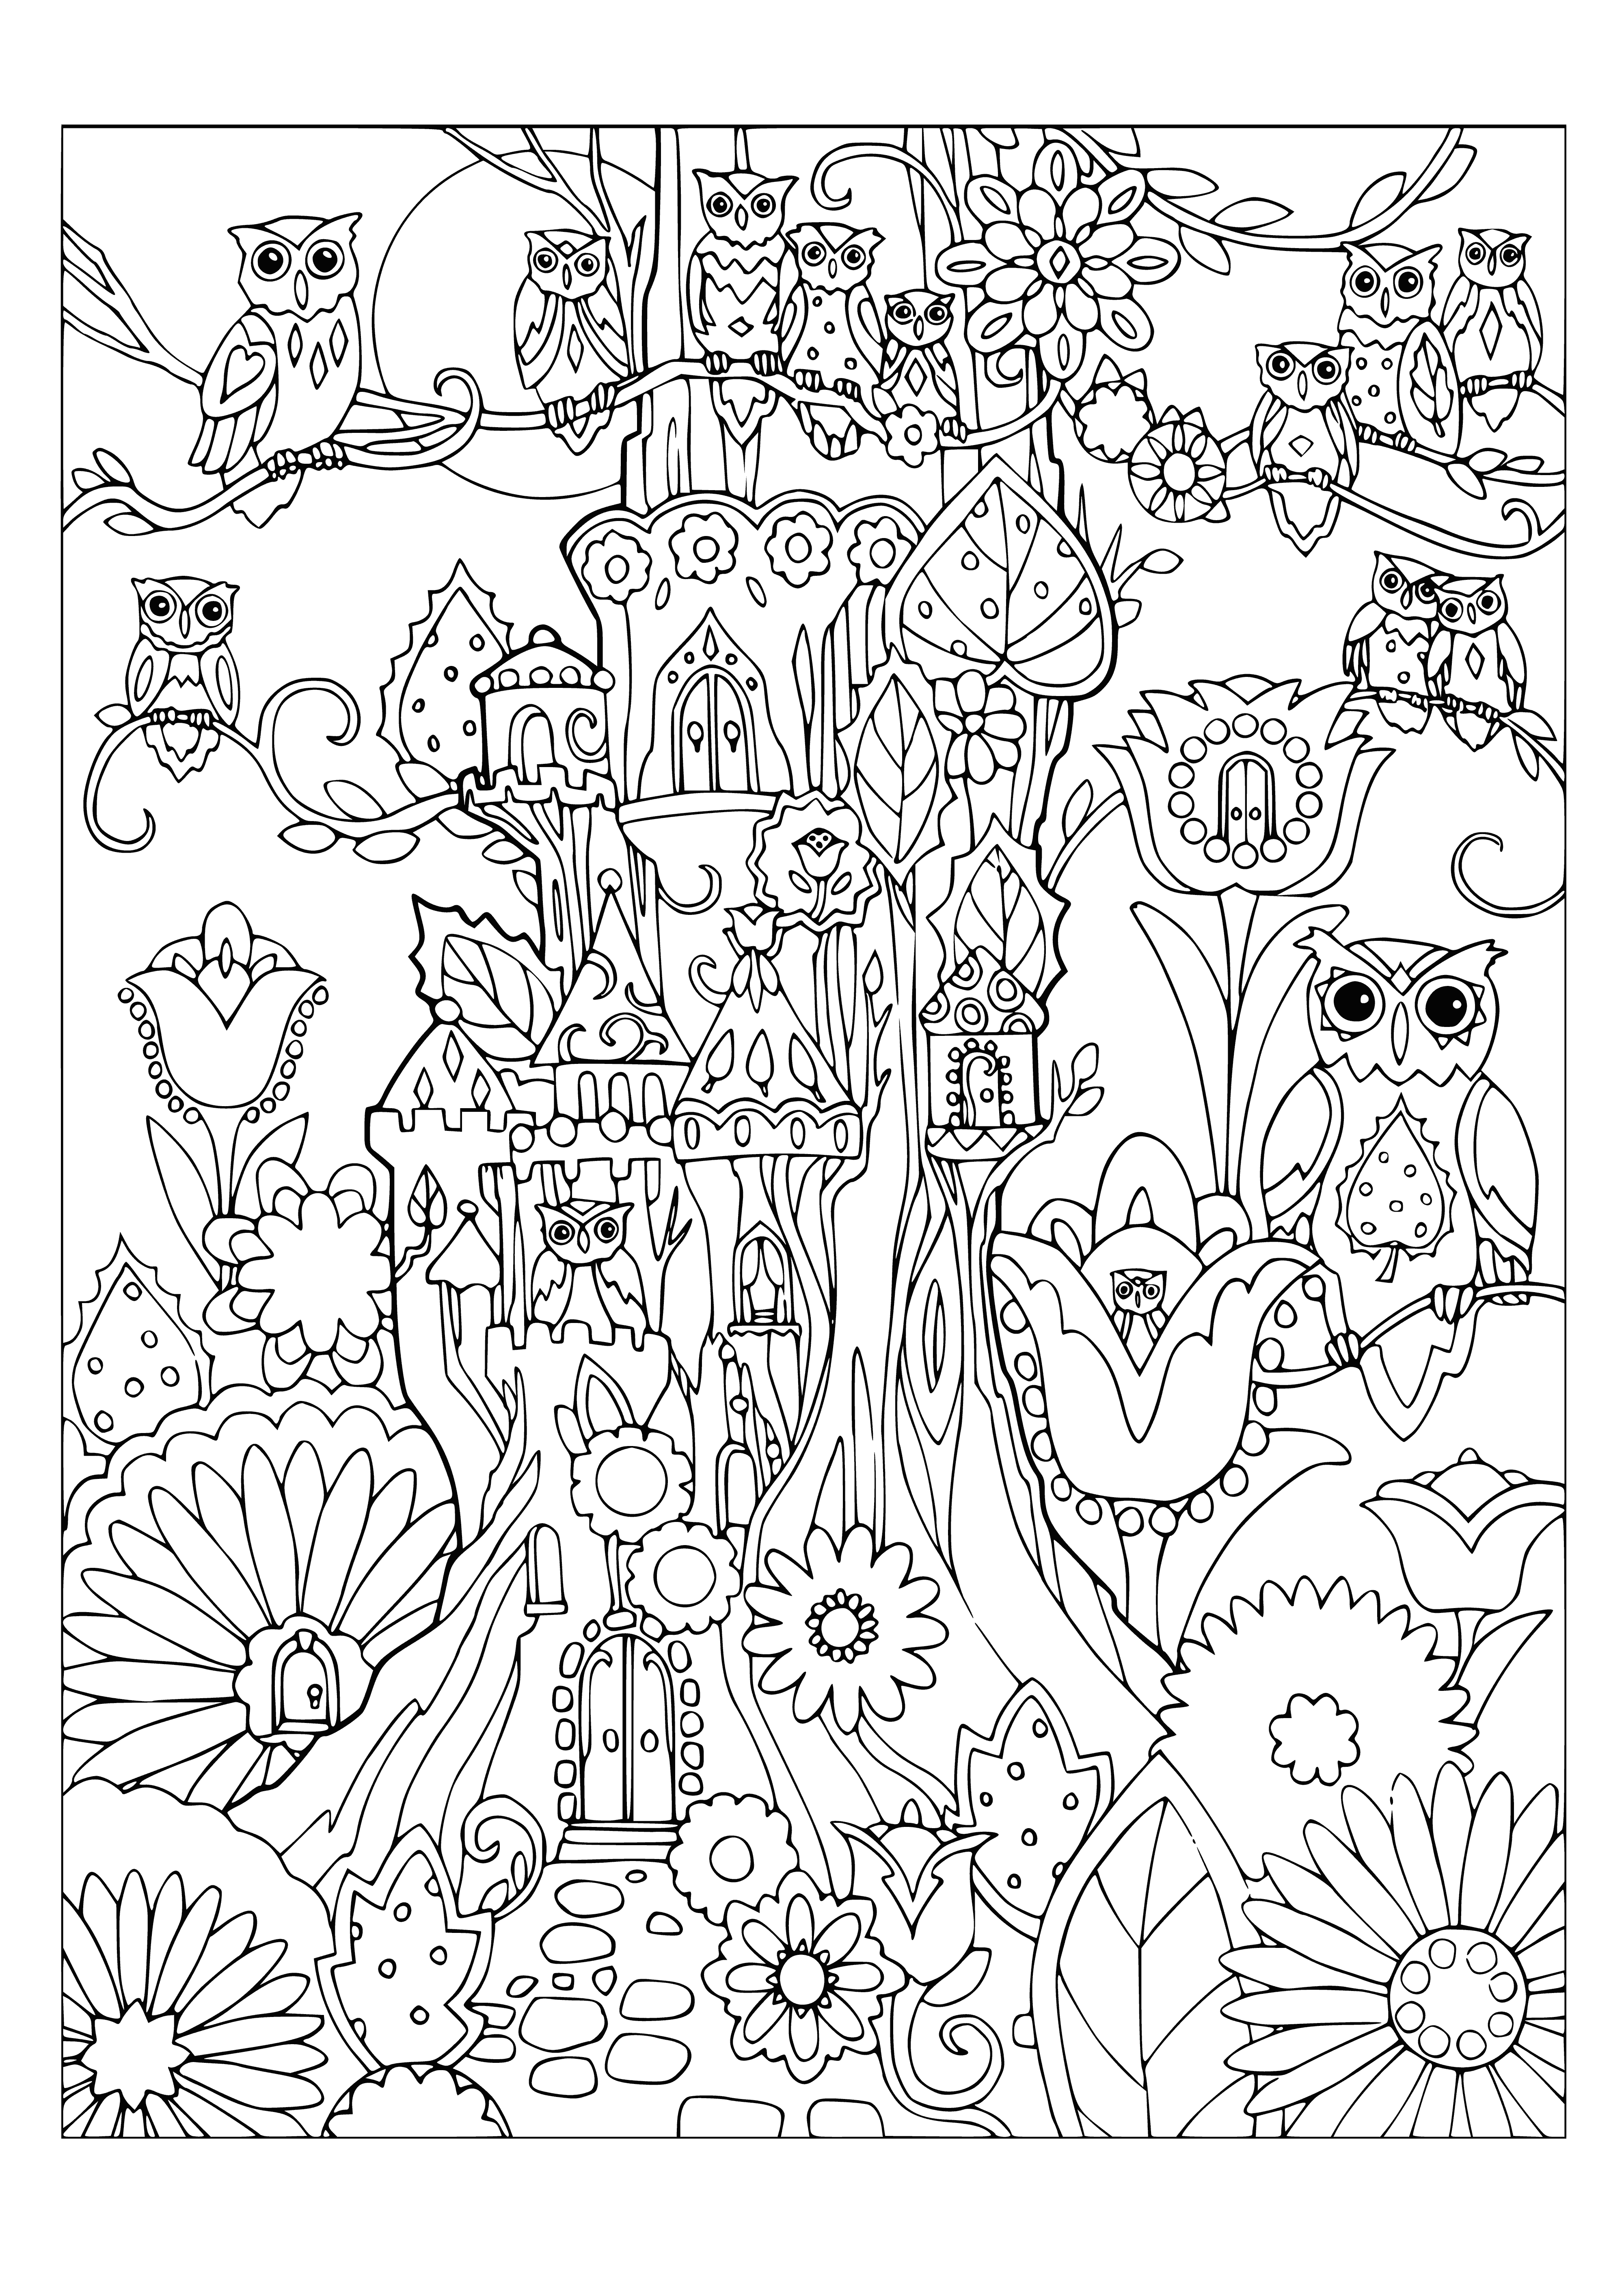 coloring page: A tree house in a big tree has a window, door with a ladder, and an owl on the roof.